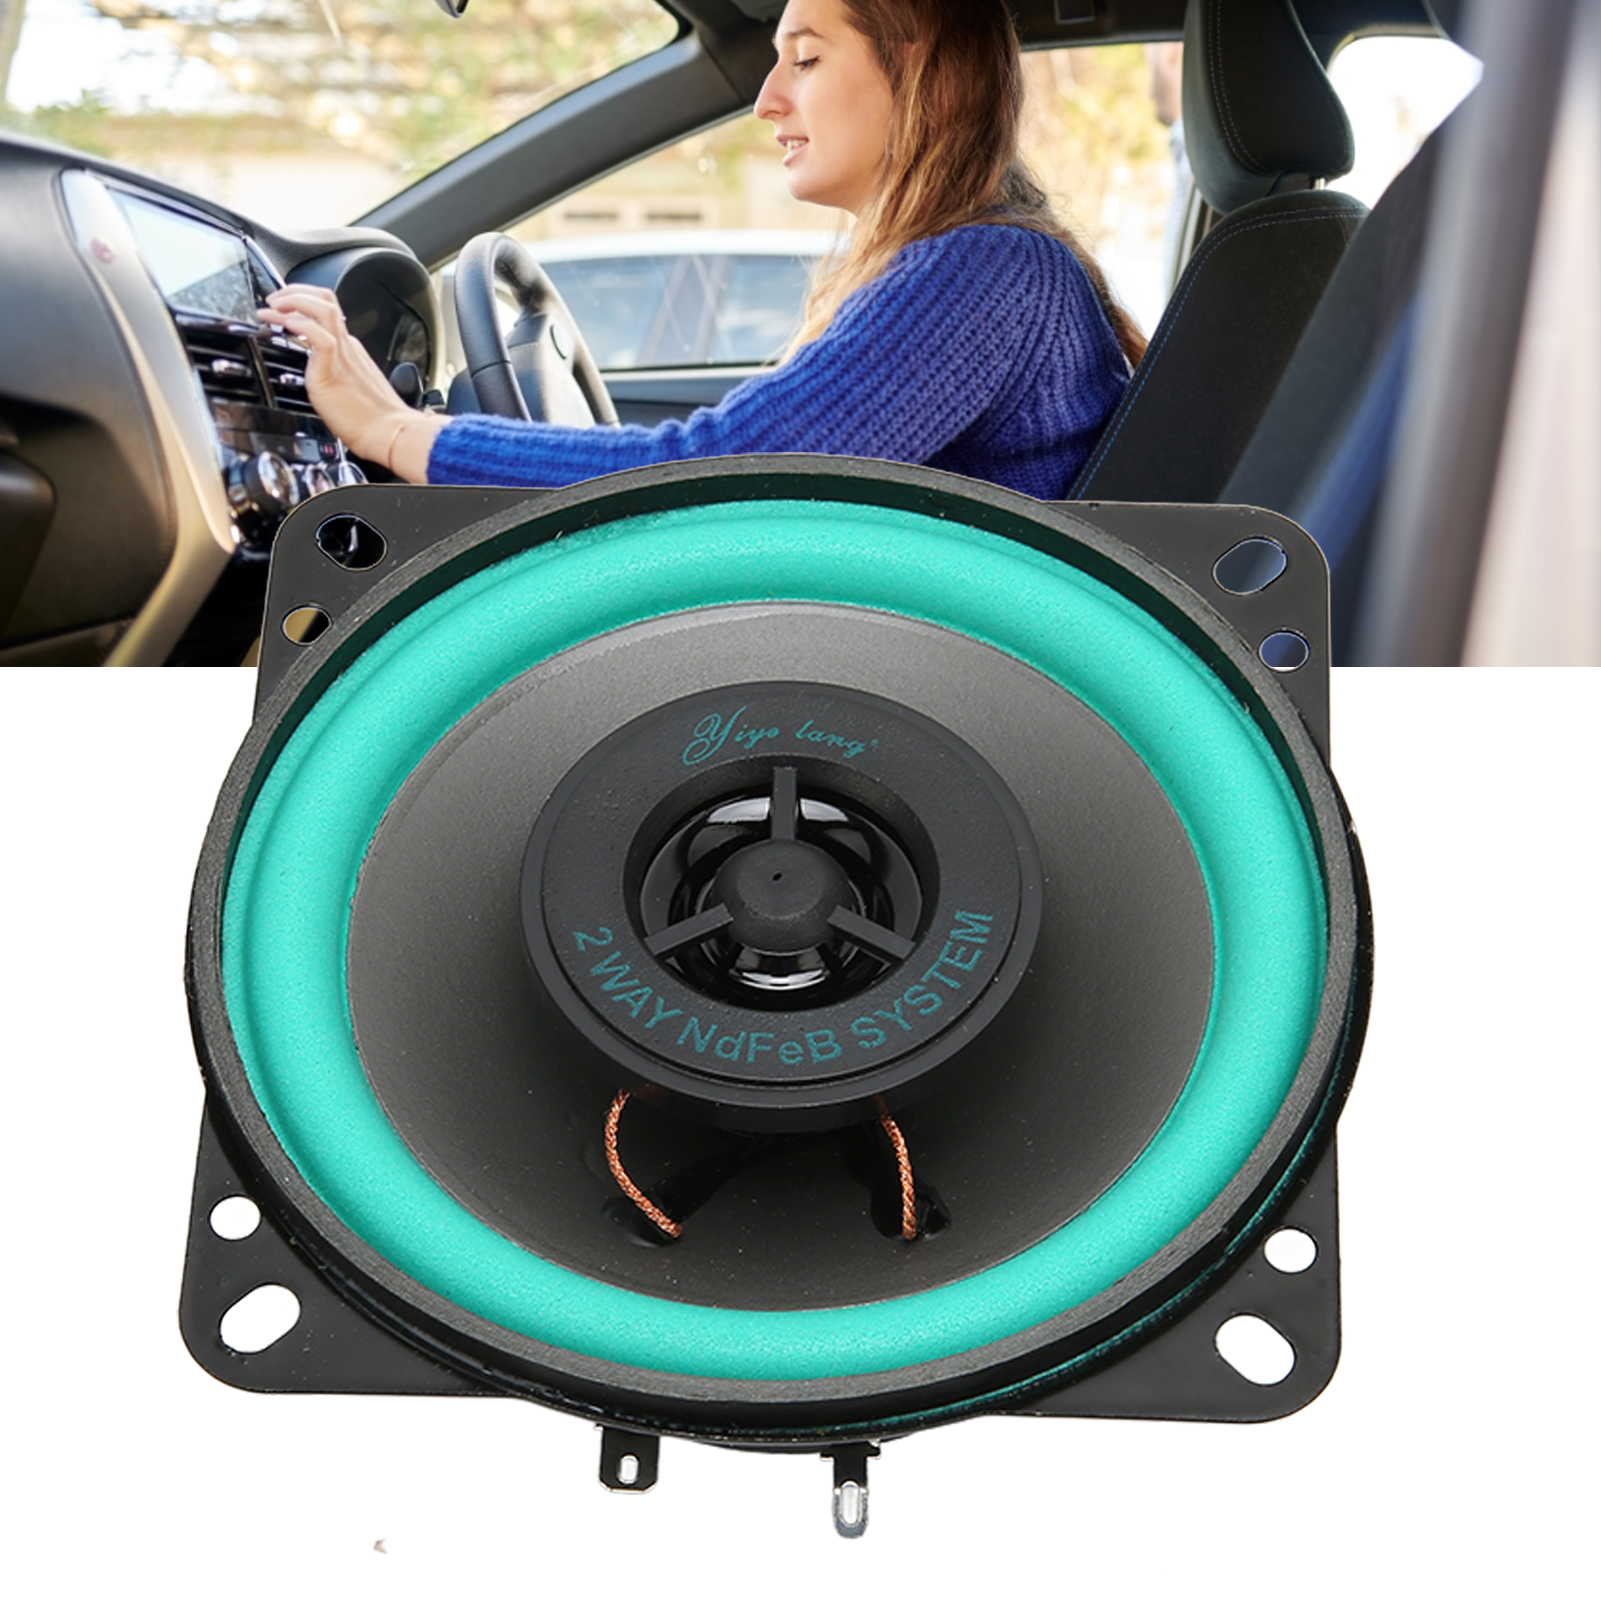 Fugacal Stereo Car Loudspeaker,4 Inch Car Speakers 100W High Power Mid Range Stereo High Sensitivity Car Coaxial Speaker for Car Sound Systems,Car Speakers - image 4 of 8